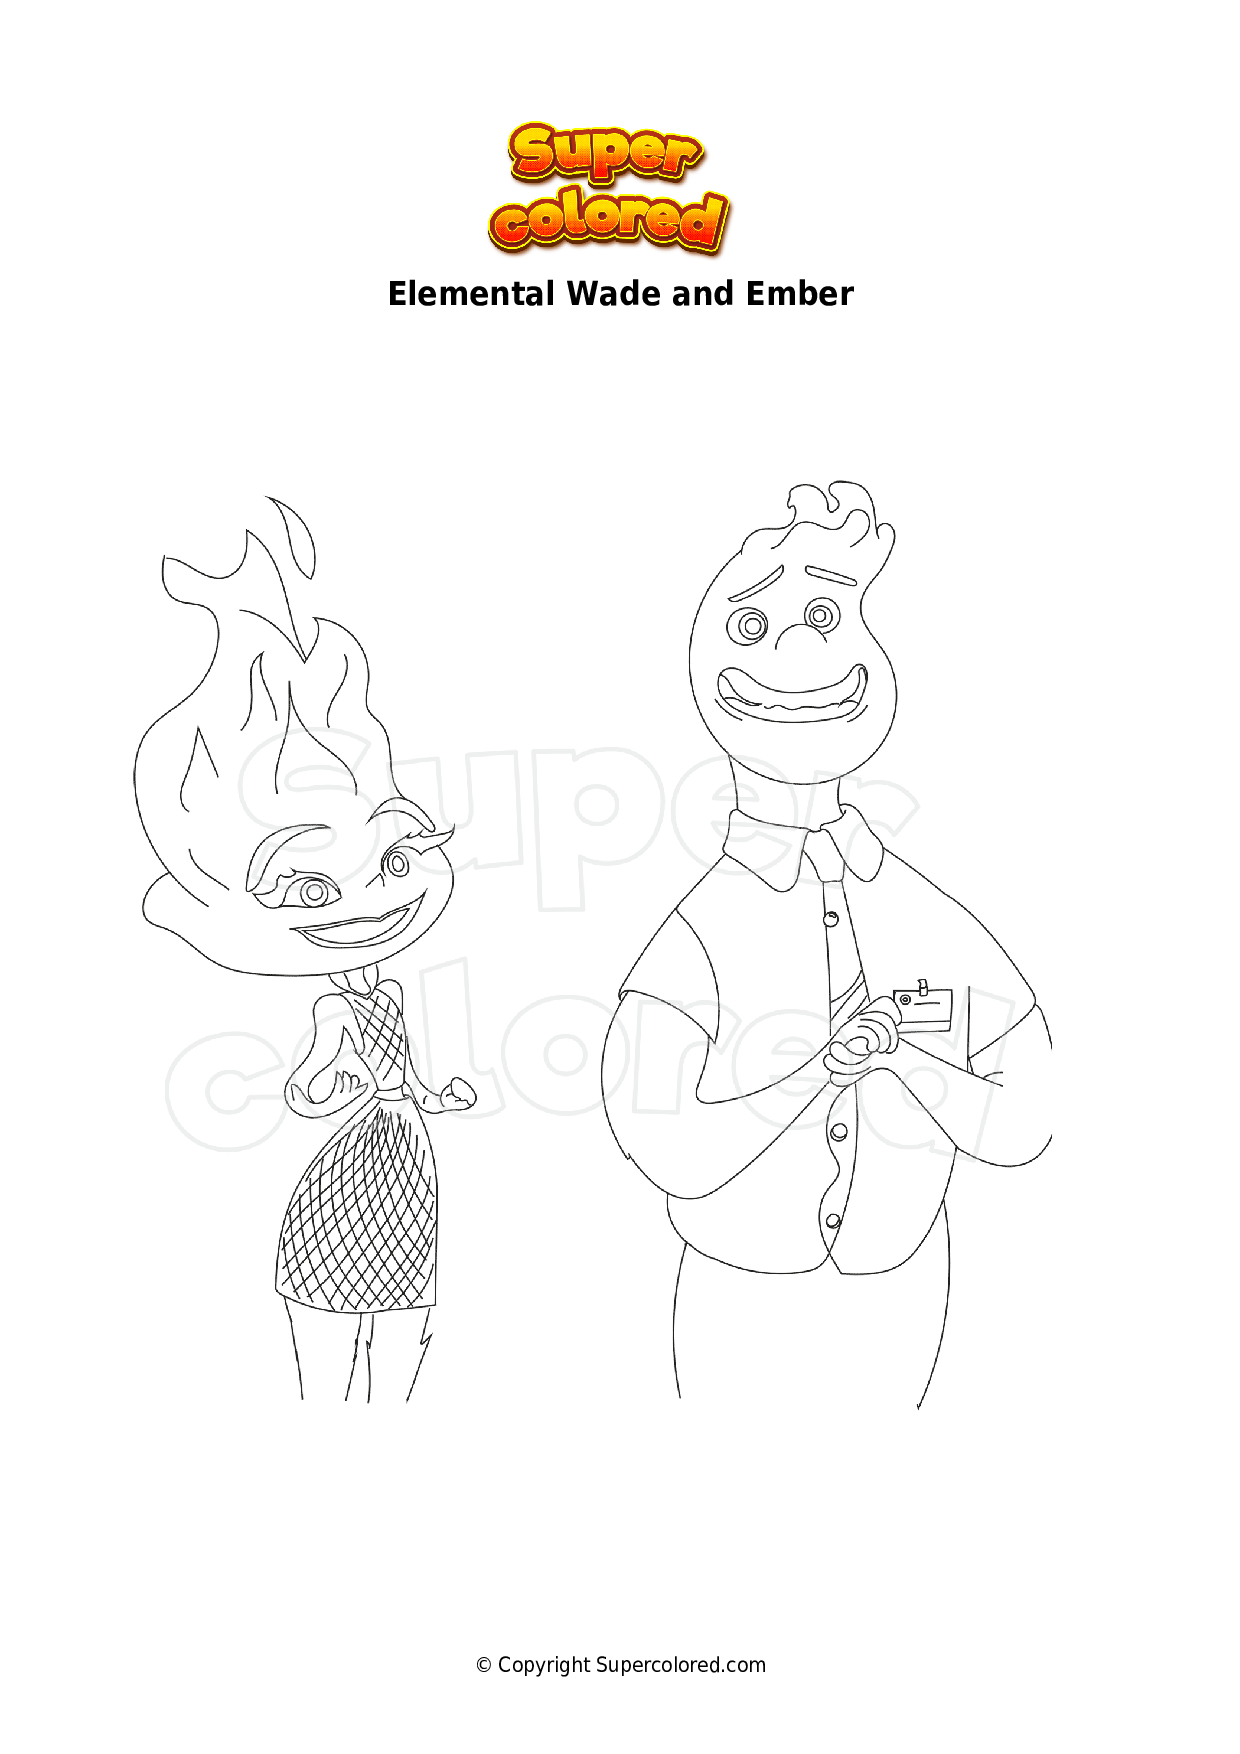 Coloring Pages - Elemental - Supercolored